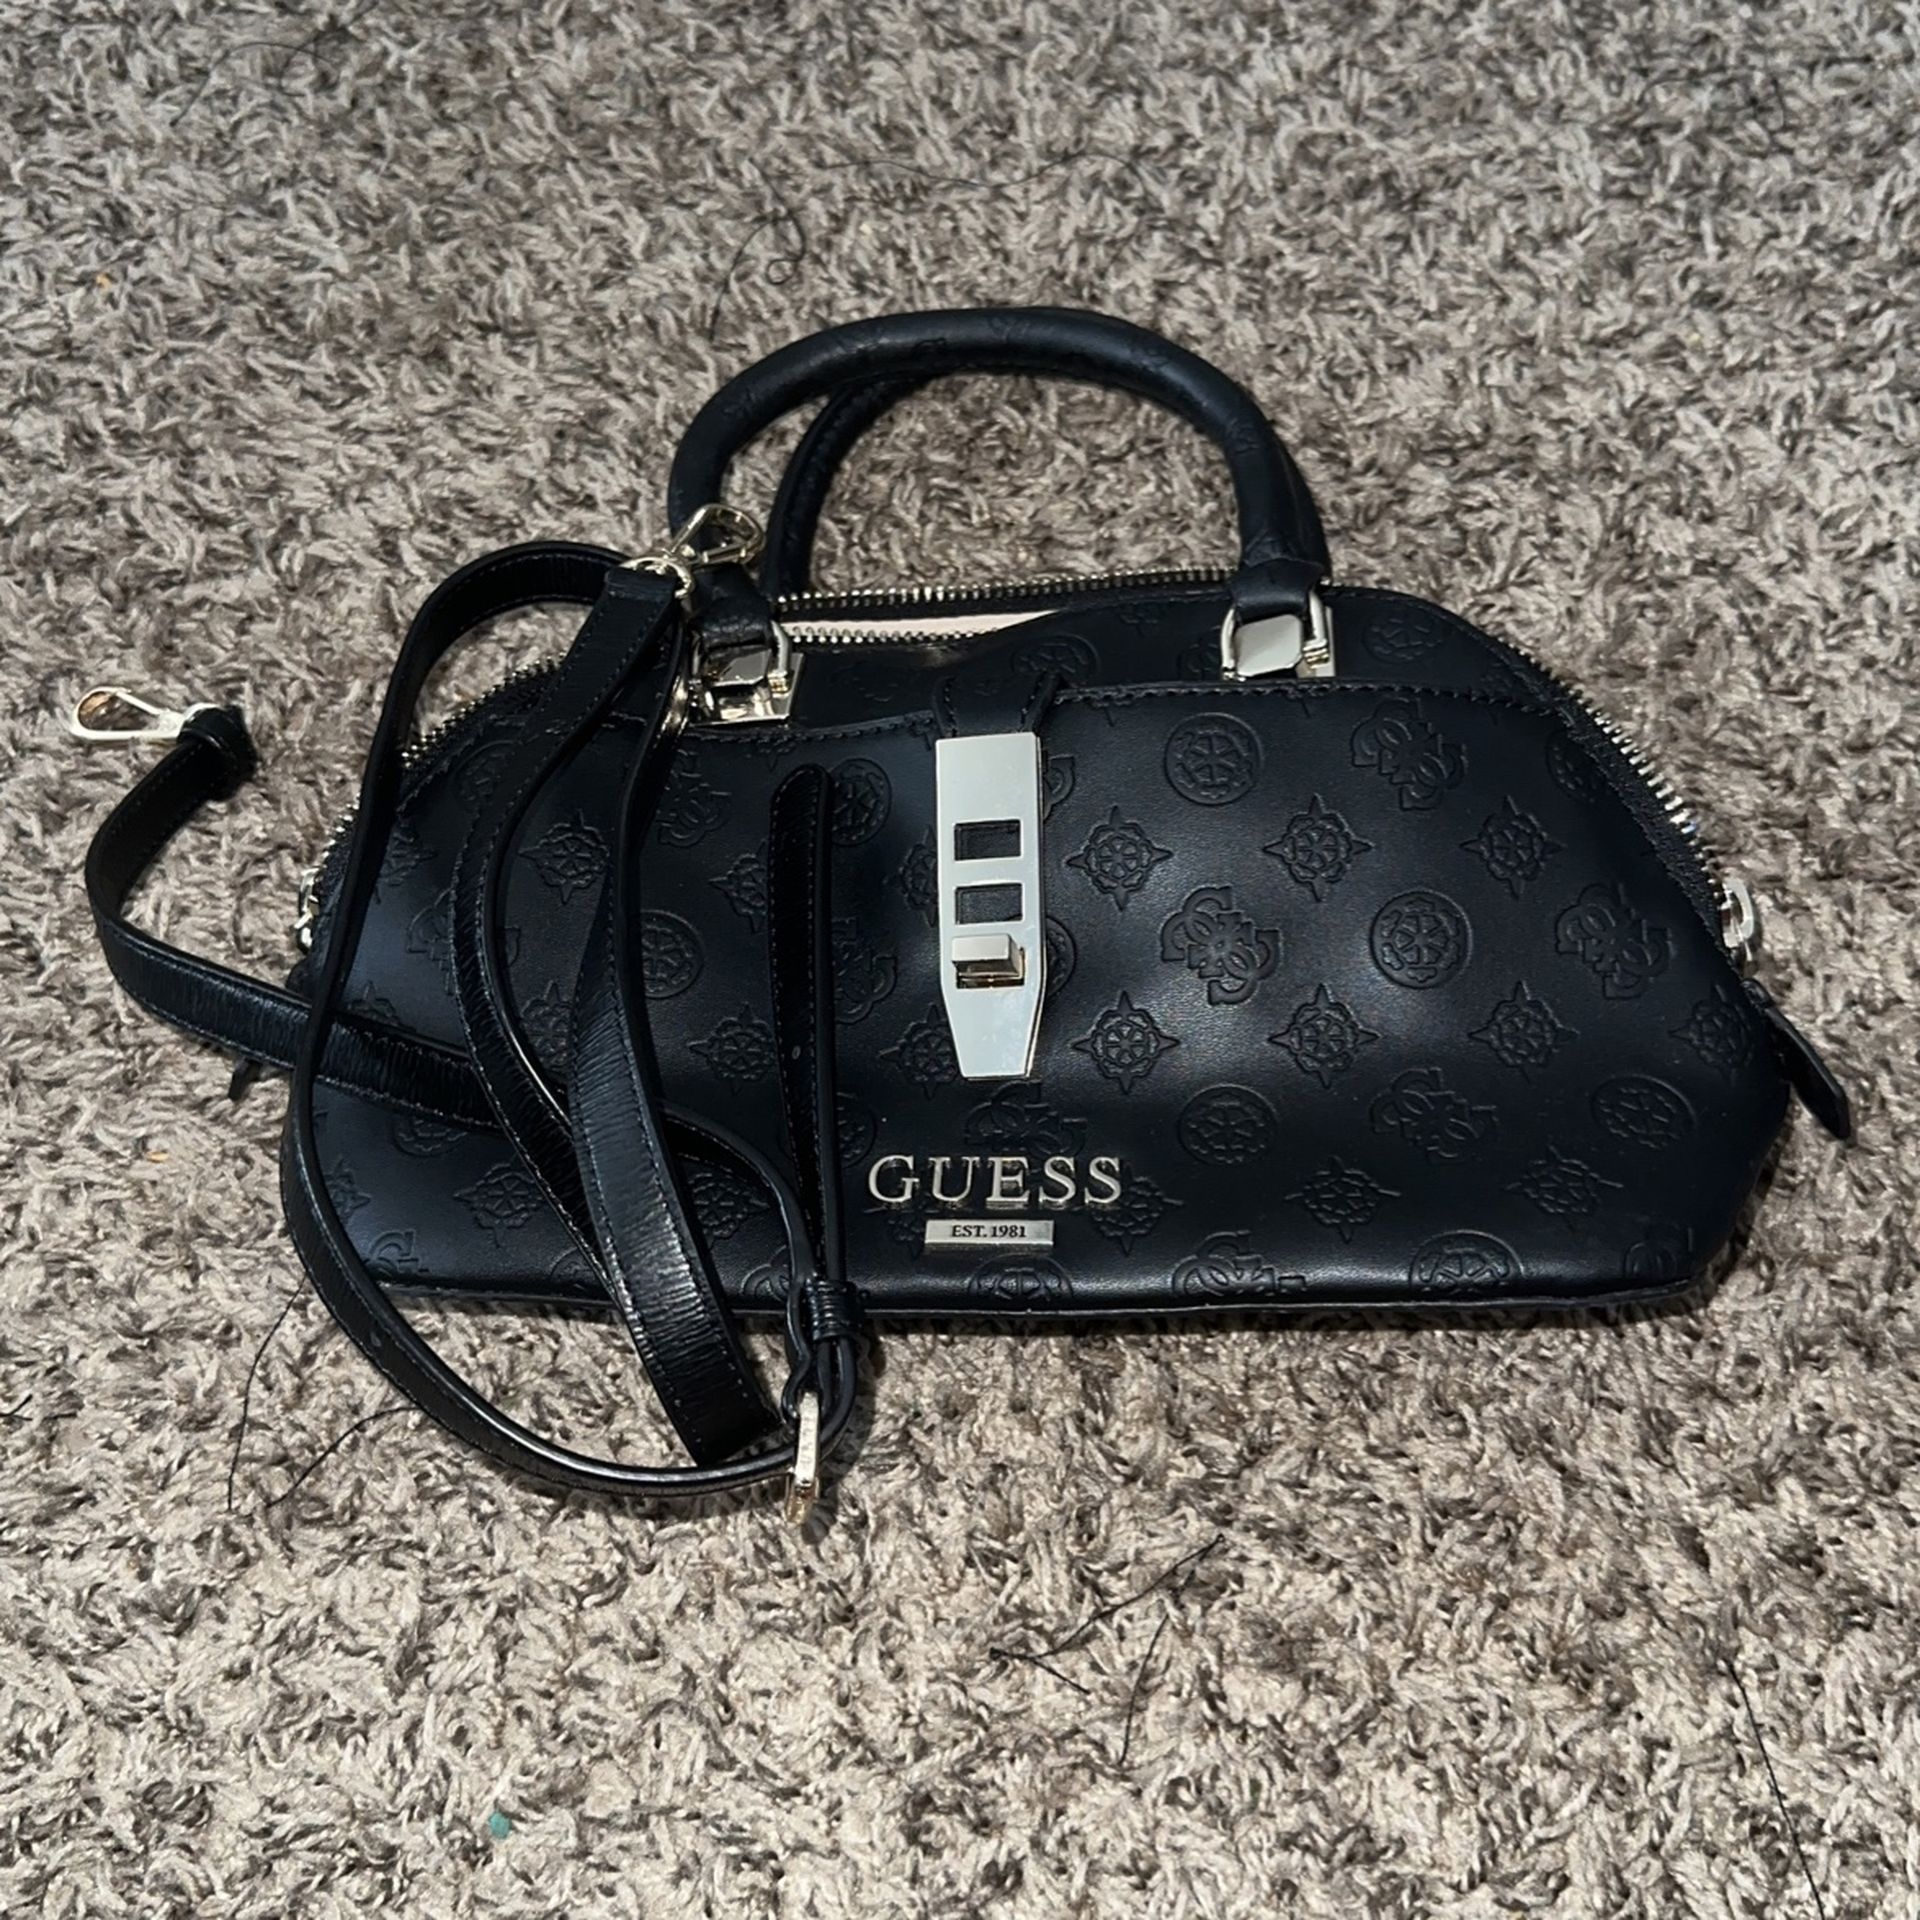 Guess Purse And Wallet Set! 